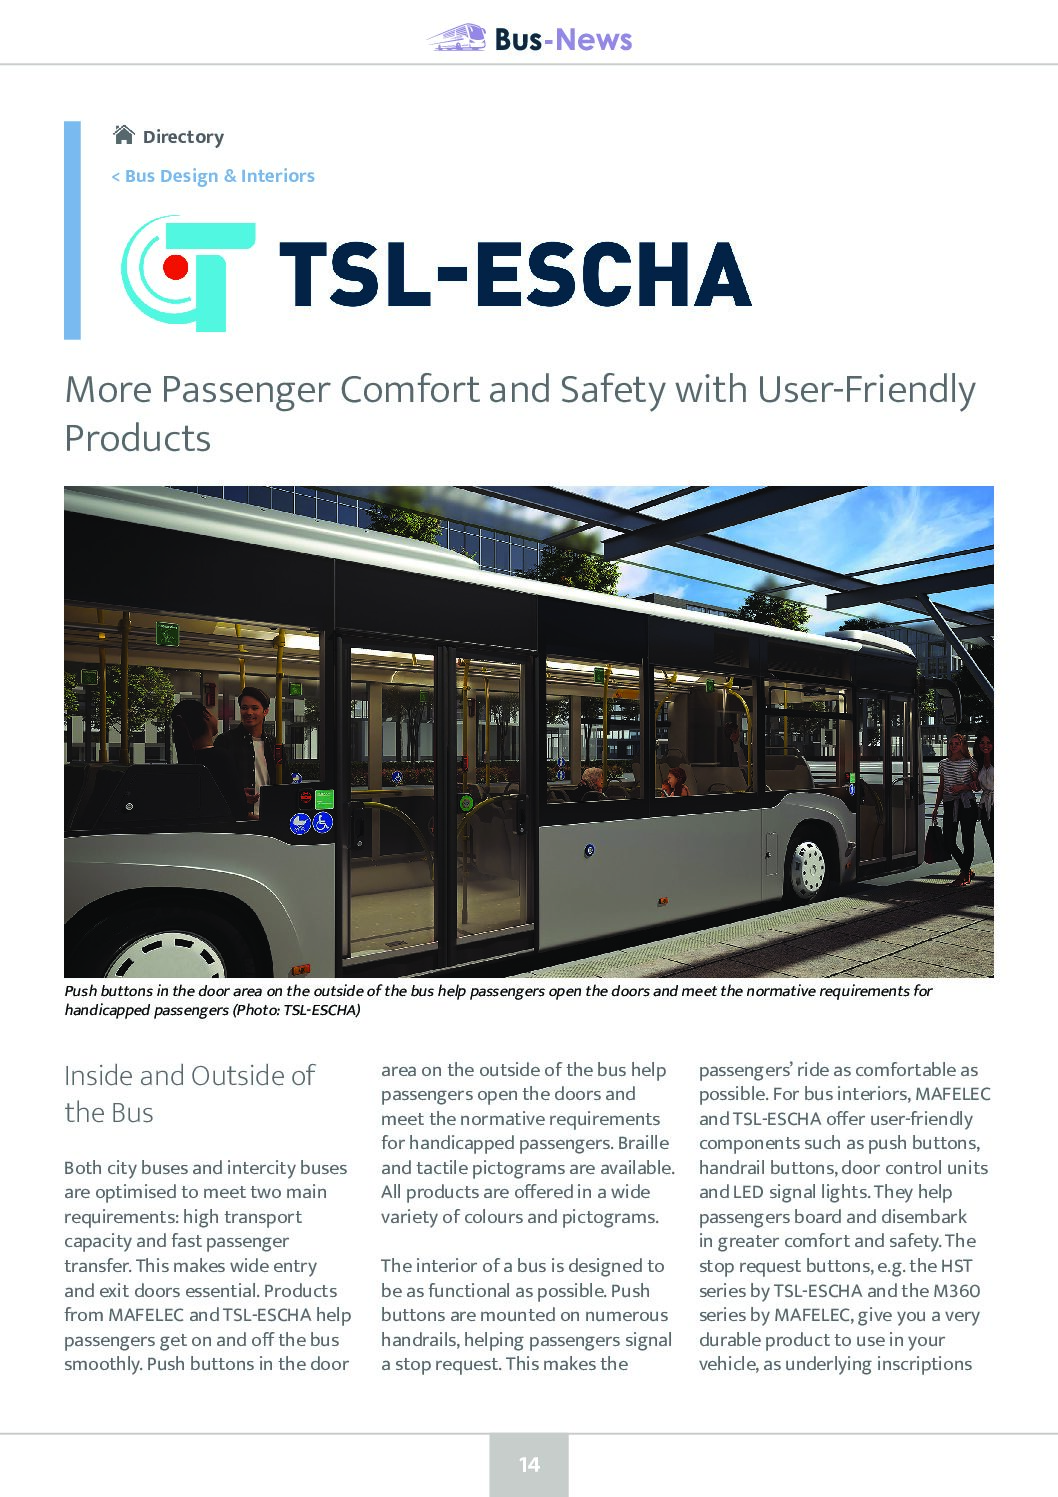 More Passenger Comfort and Safety with User-Friendly Products